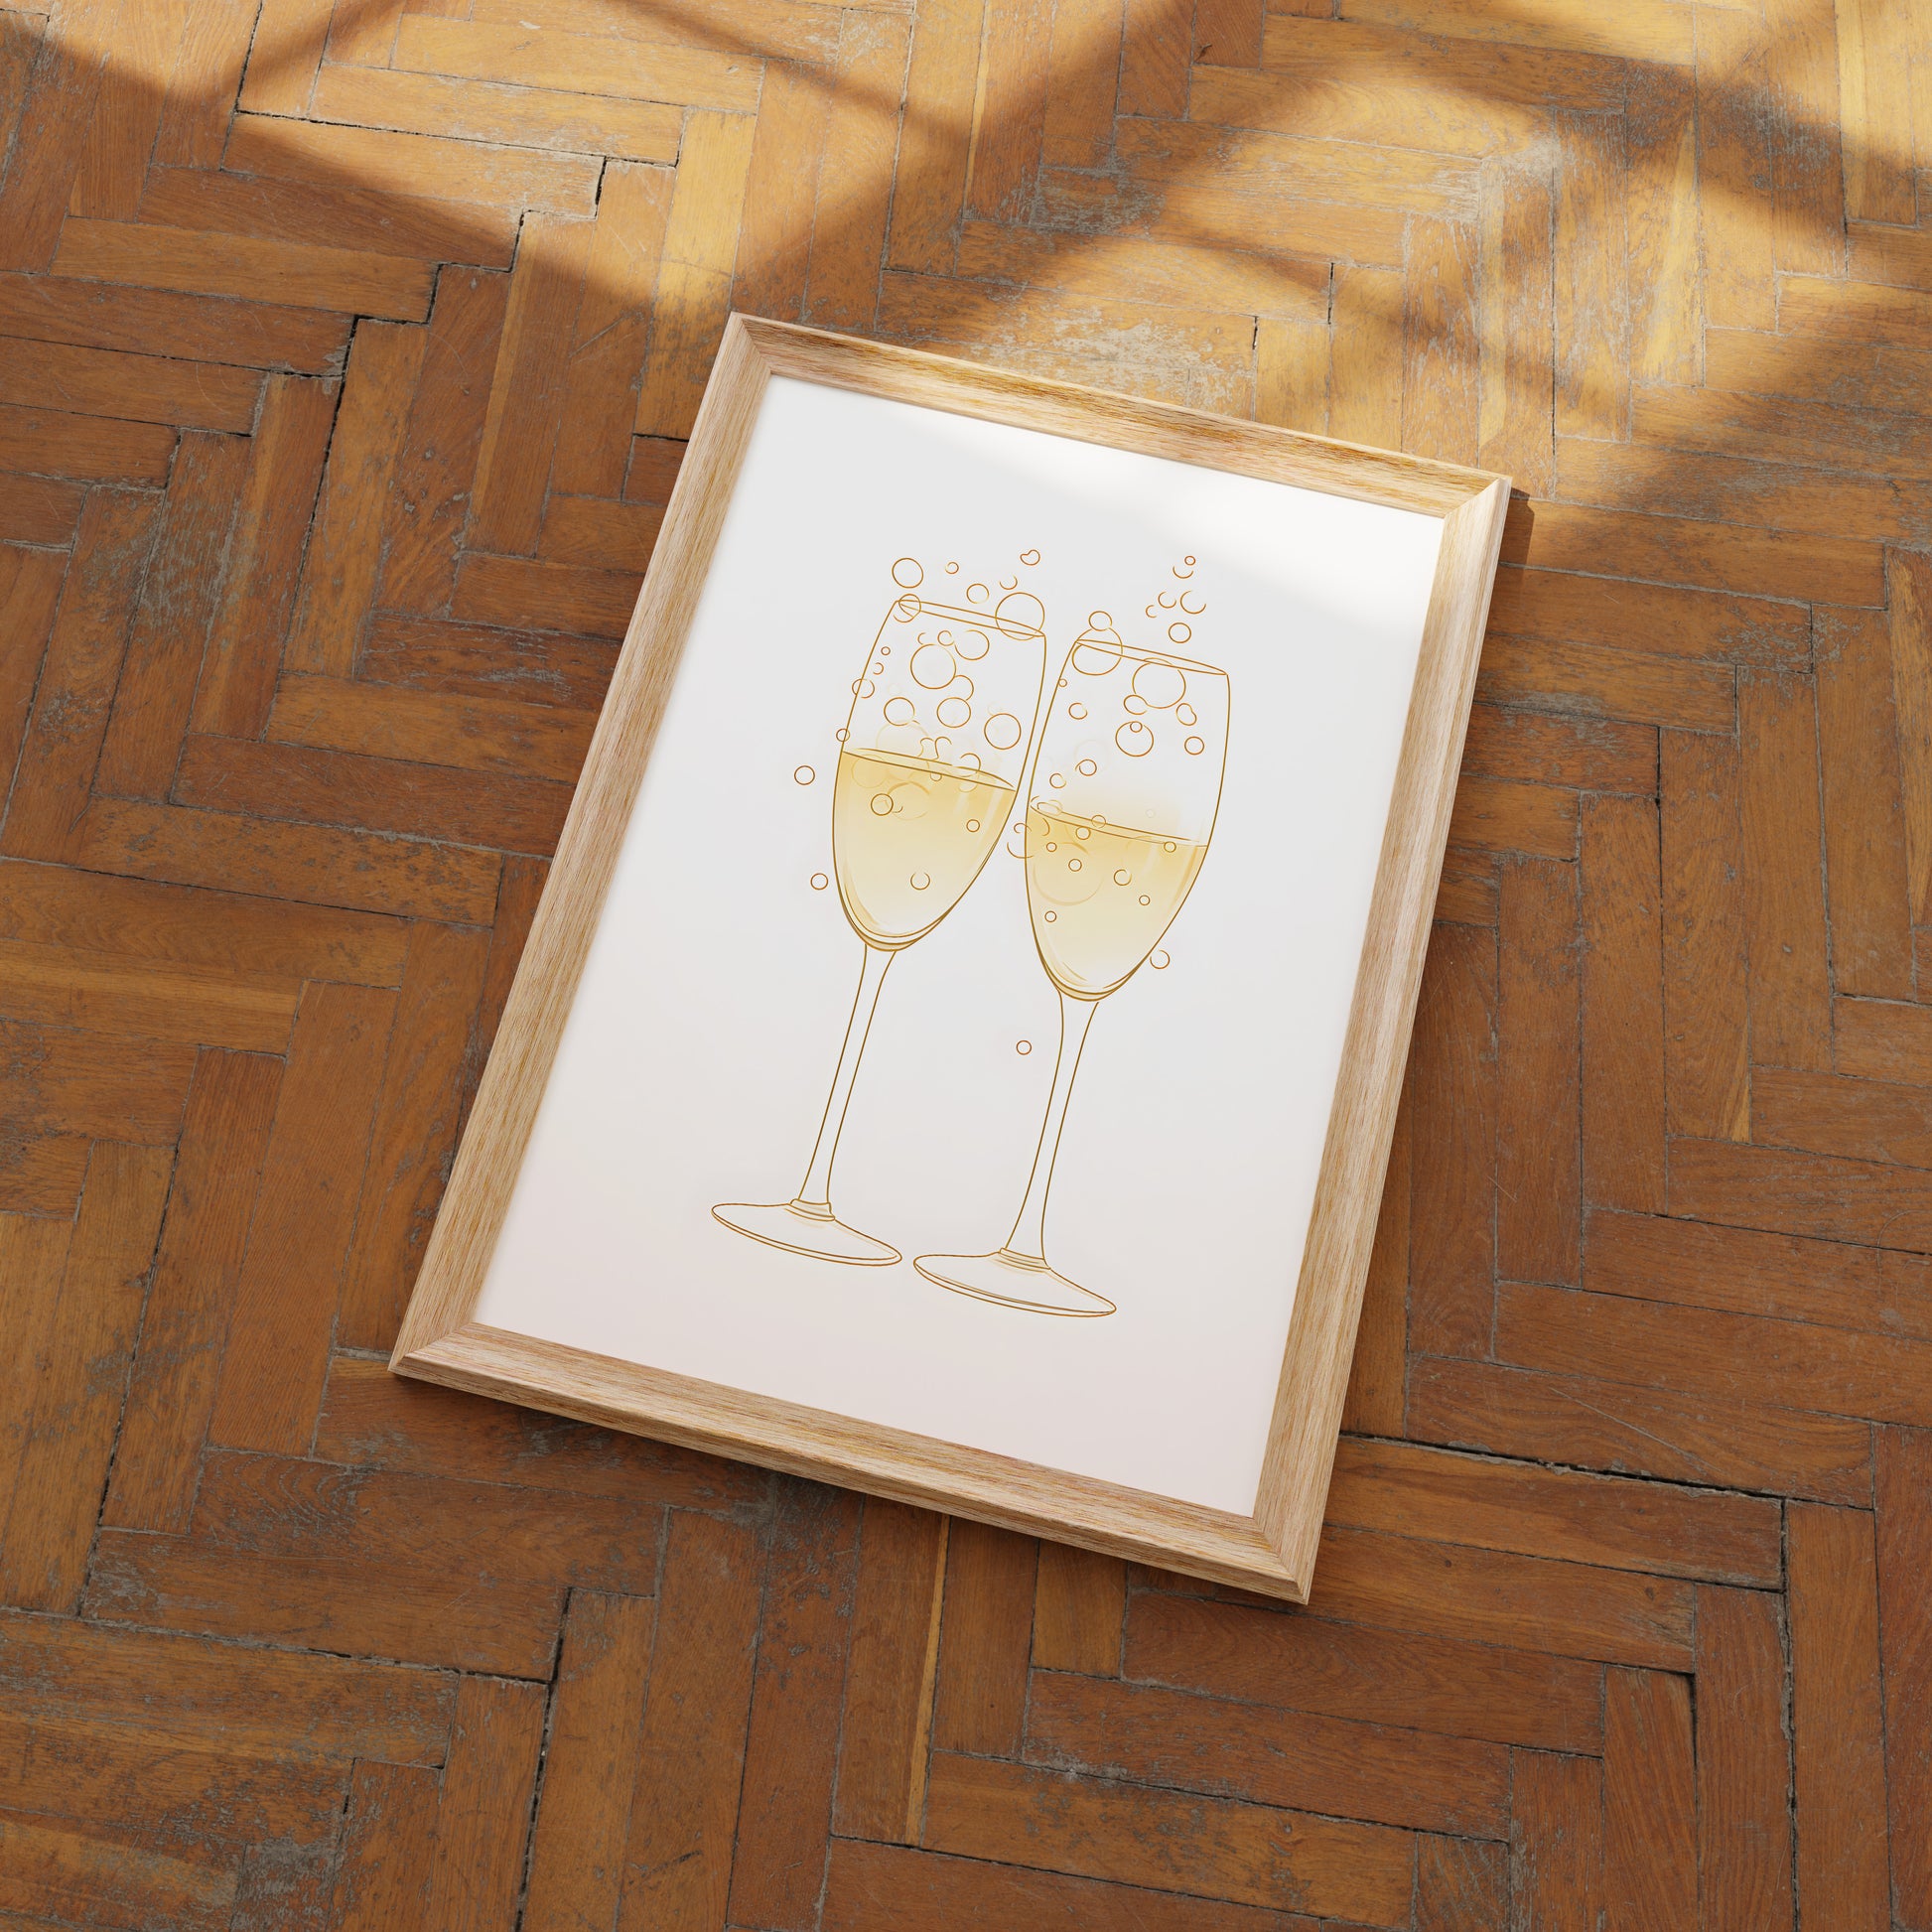 A framed illustration of two champagne glasses toasting on a herringbone wood floor.